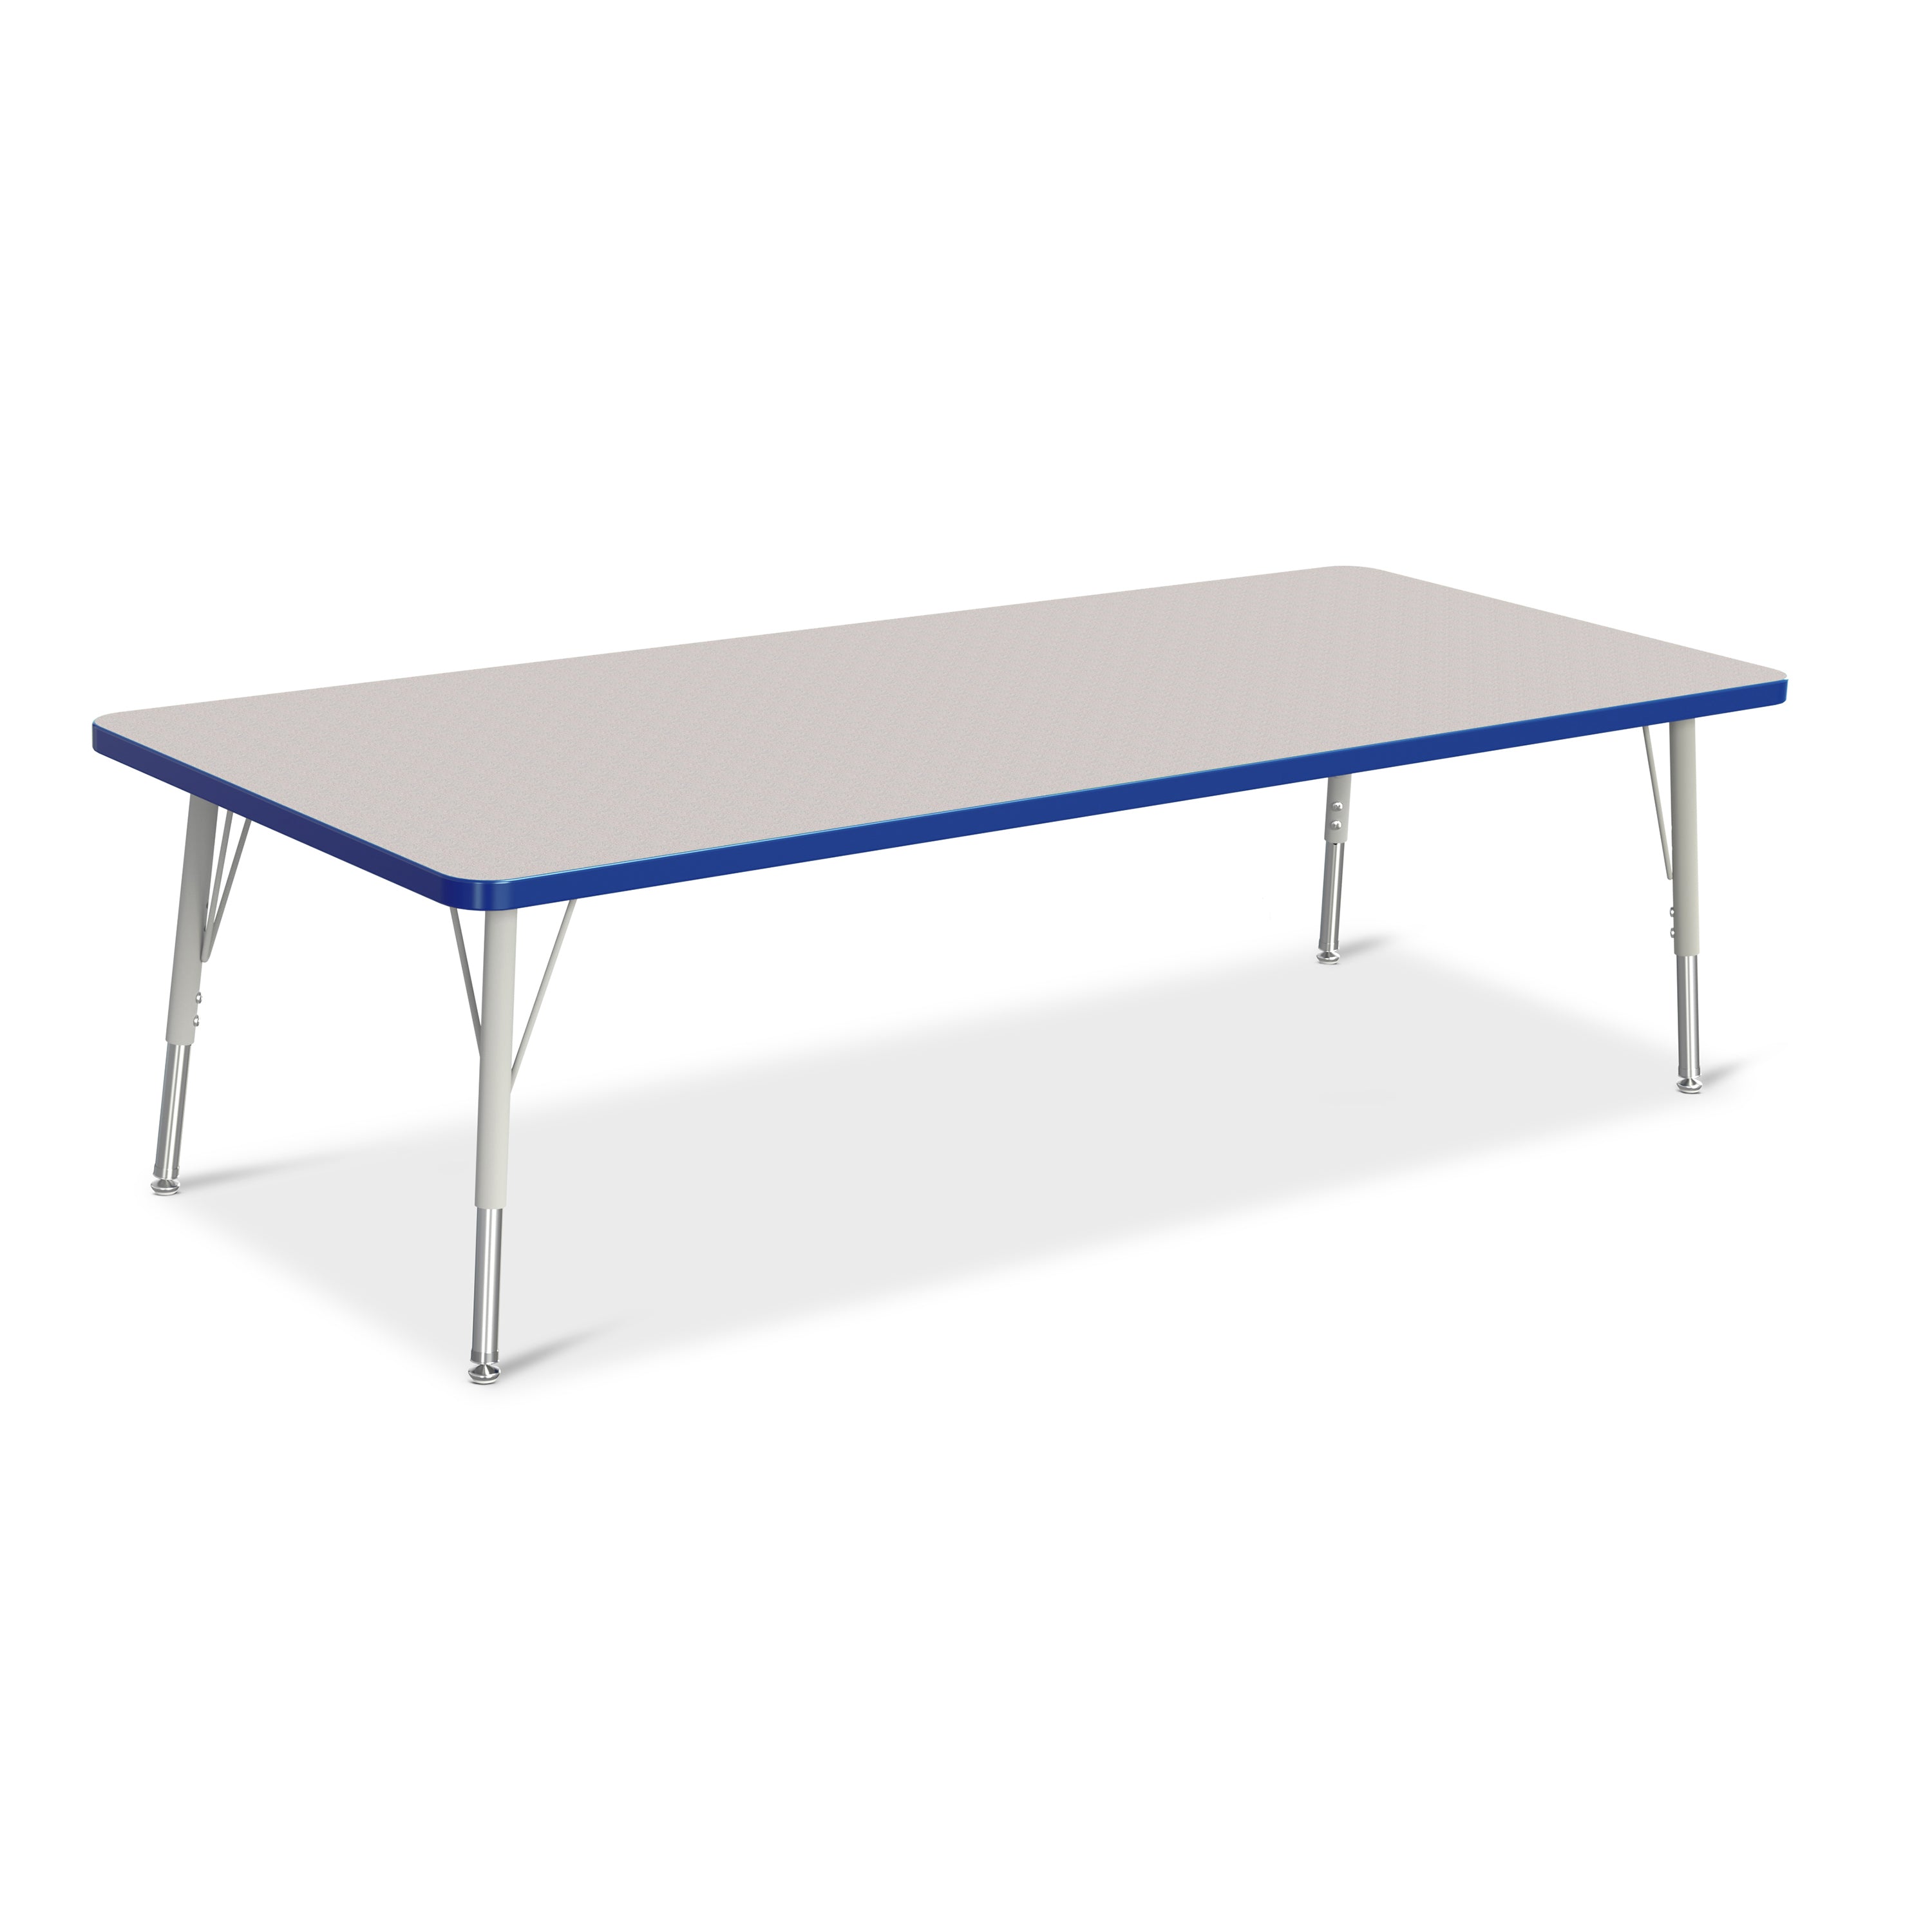 6413JCE003, Berries Rectangle Activity Table - 30" X 72", E-height - Freckled Gray/Blue/Gray